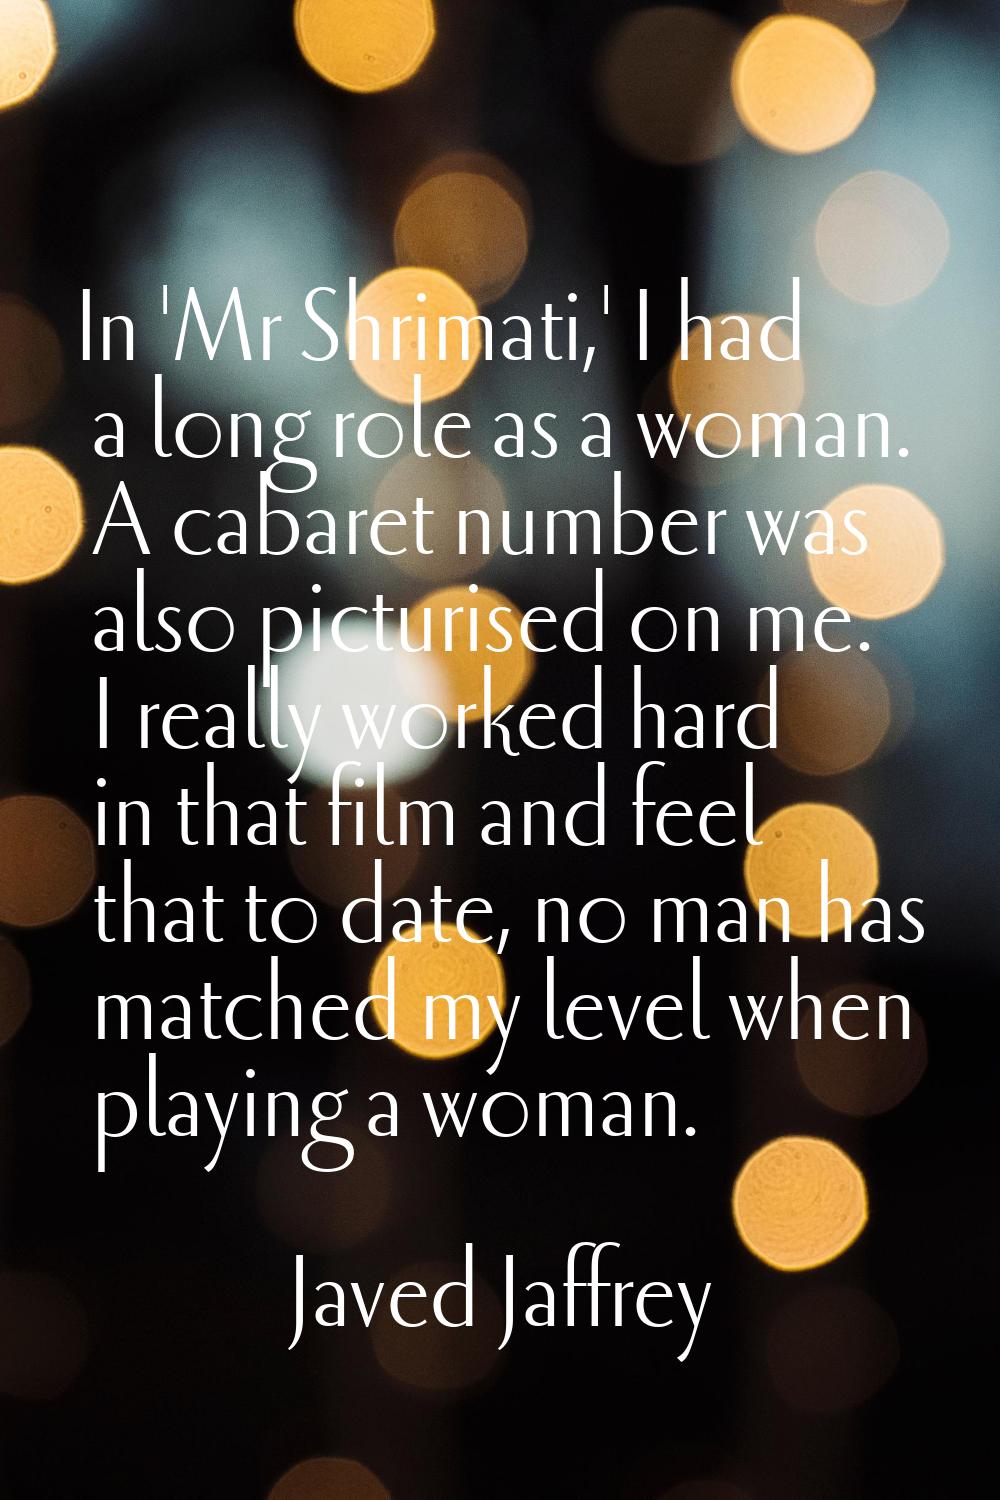 In 'Mr Shrimati,' I had a long role as a woman. A cabaret number was also picturised on me. I reall